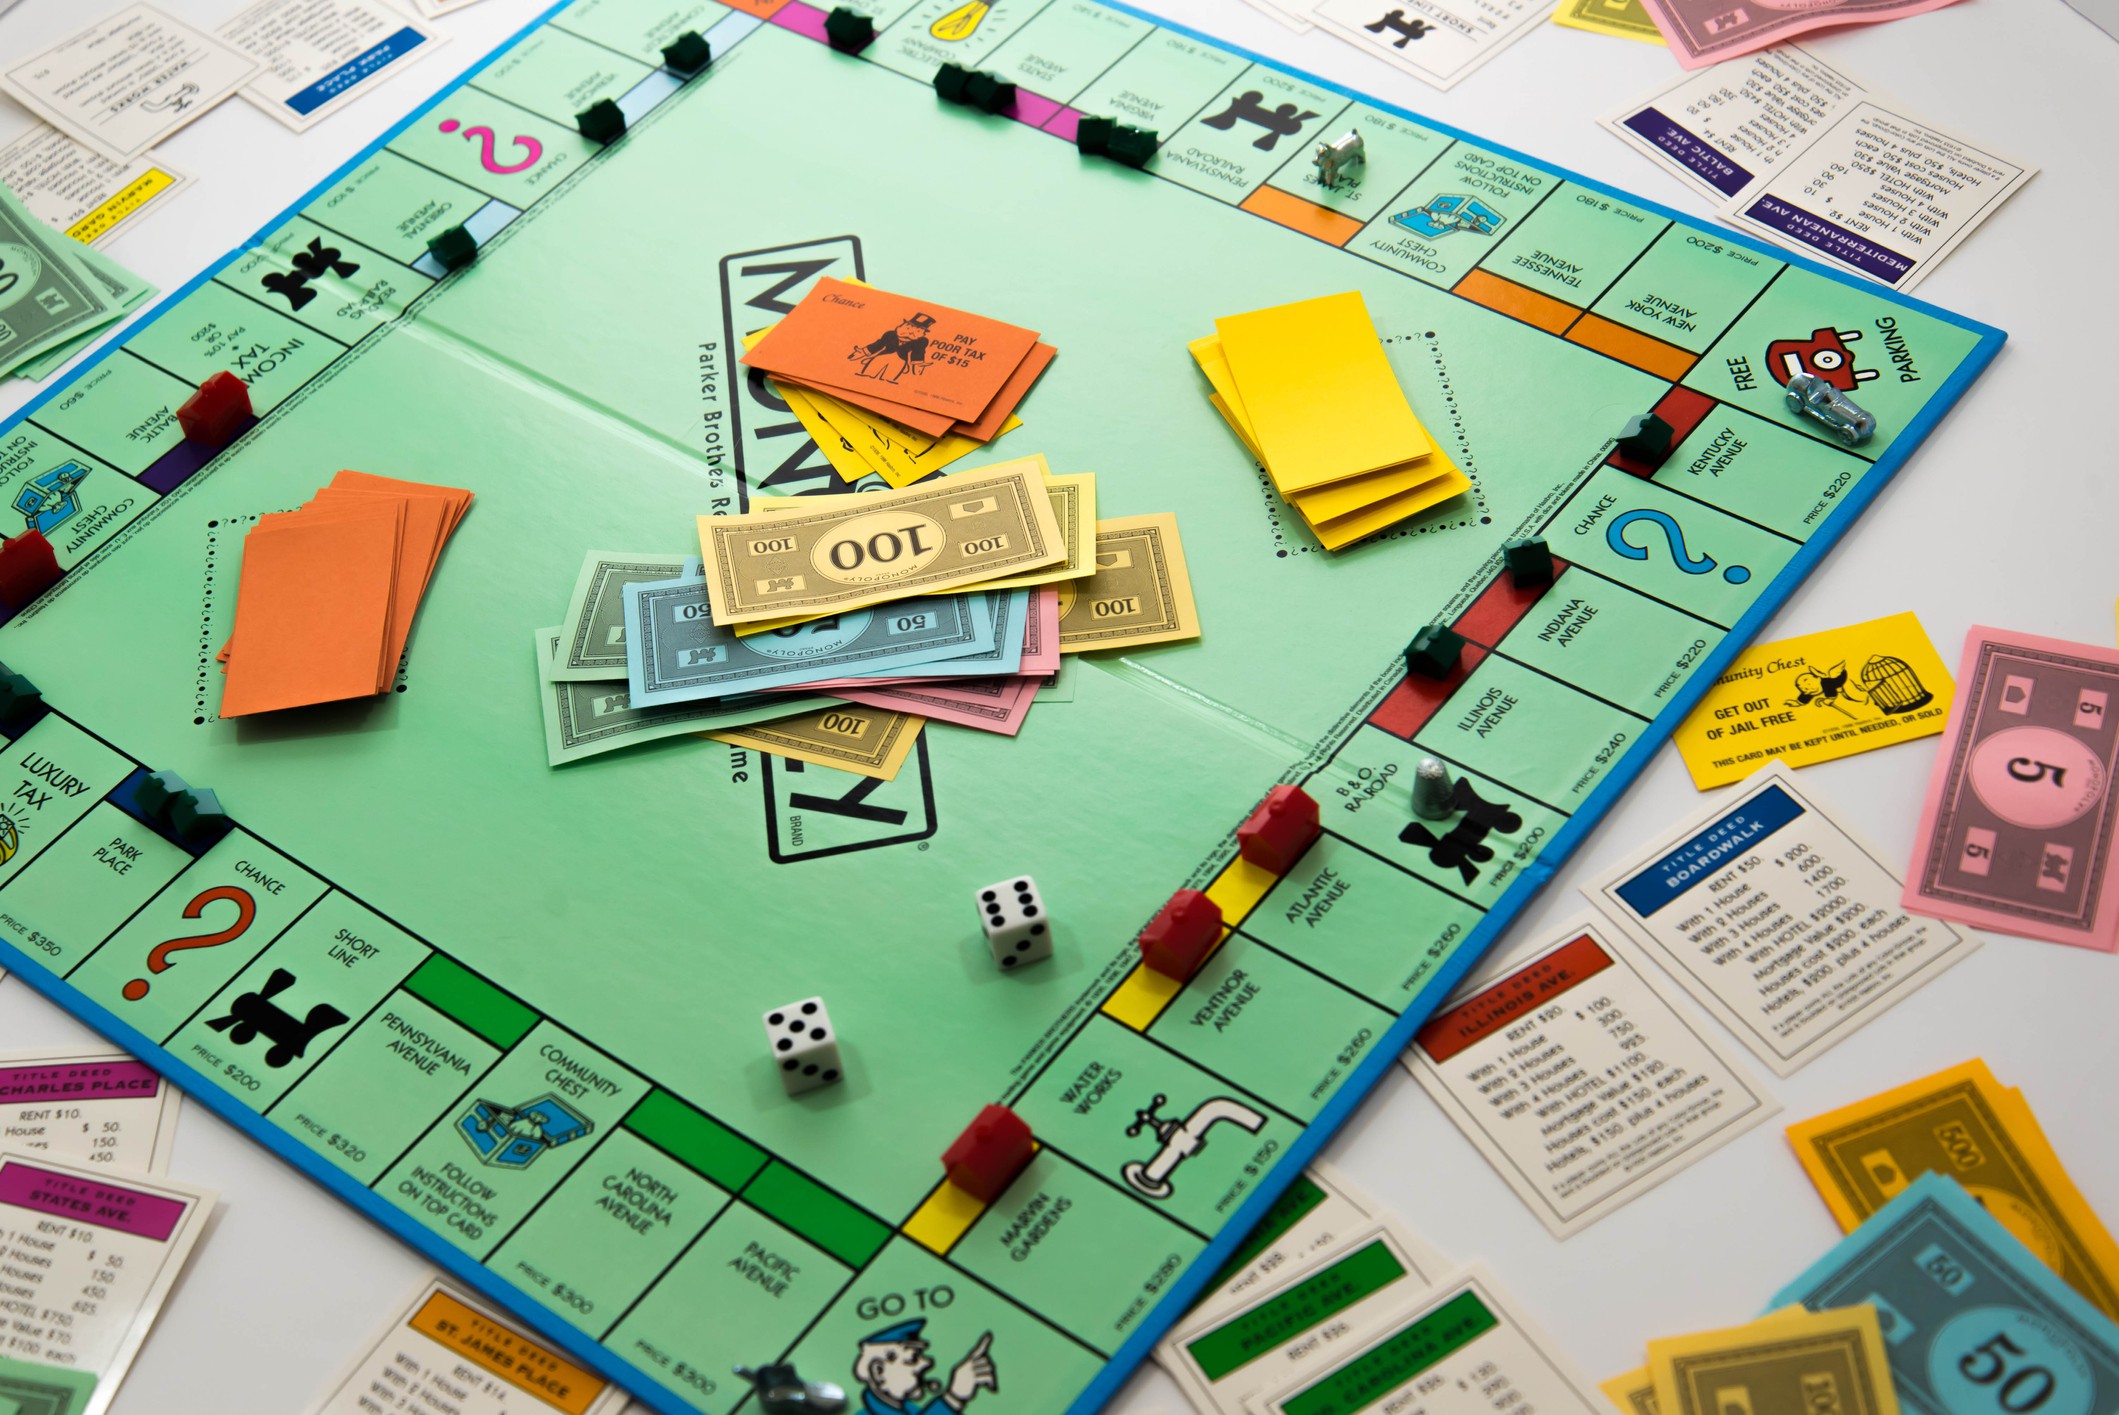 Play These 11 Fun Board Games Online with Friends in 2022 - MPL Blog